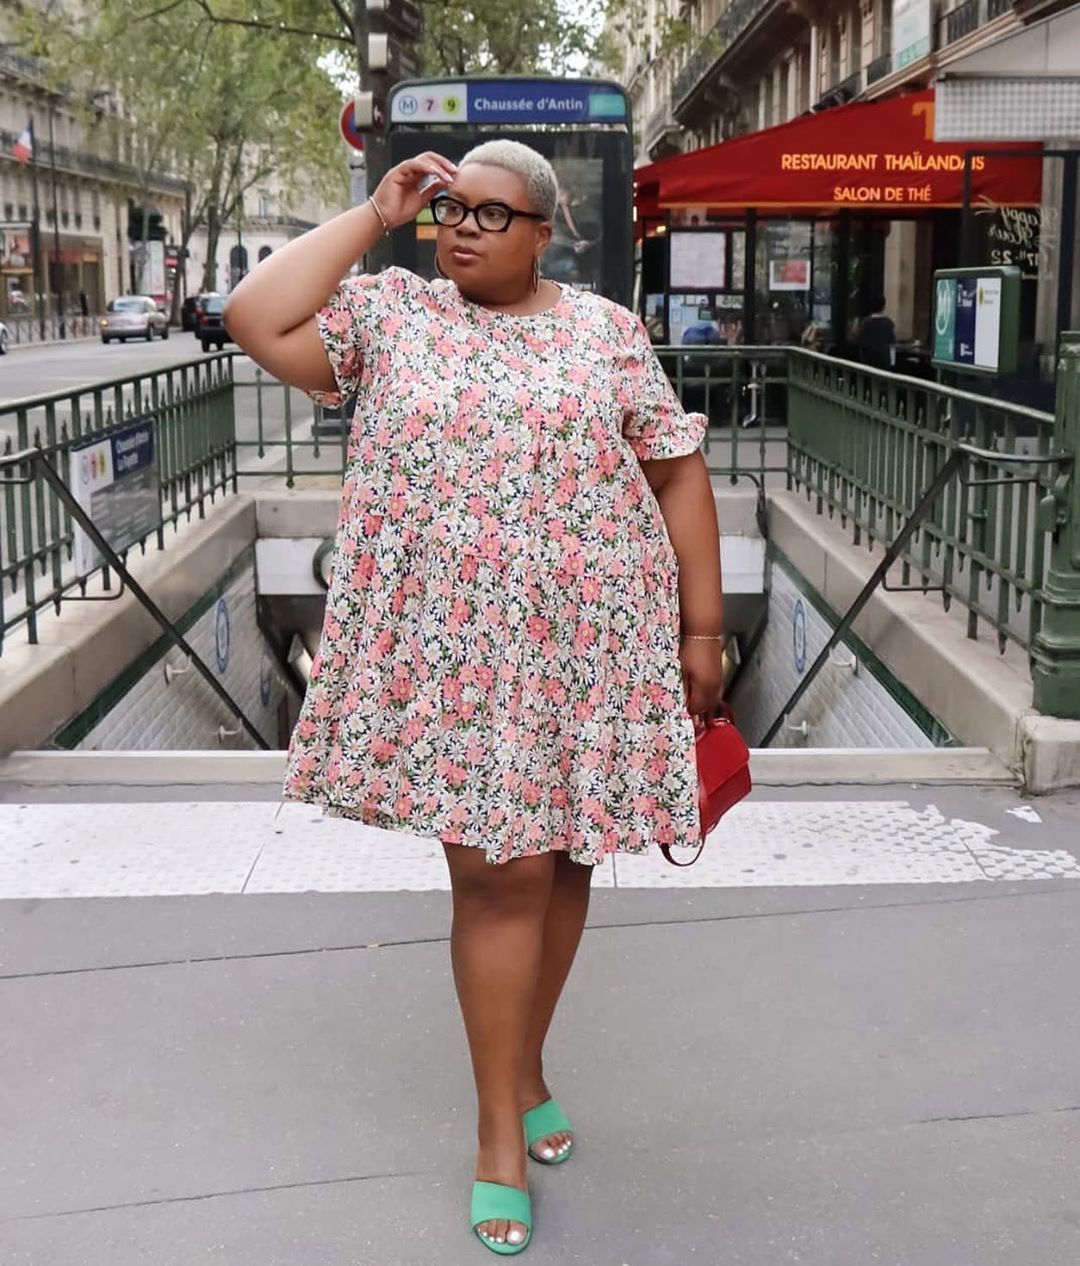 SHEIN.COM - It’s the dress for me 💚💫✨@maya.curvy

Shop Item #: 1306799

#SHEINgals #SHEINstyle #floralinspiration